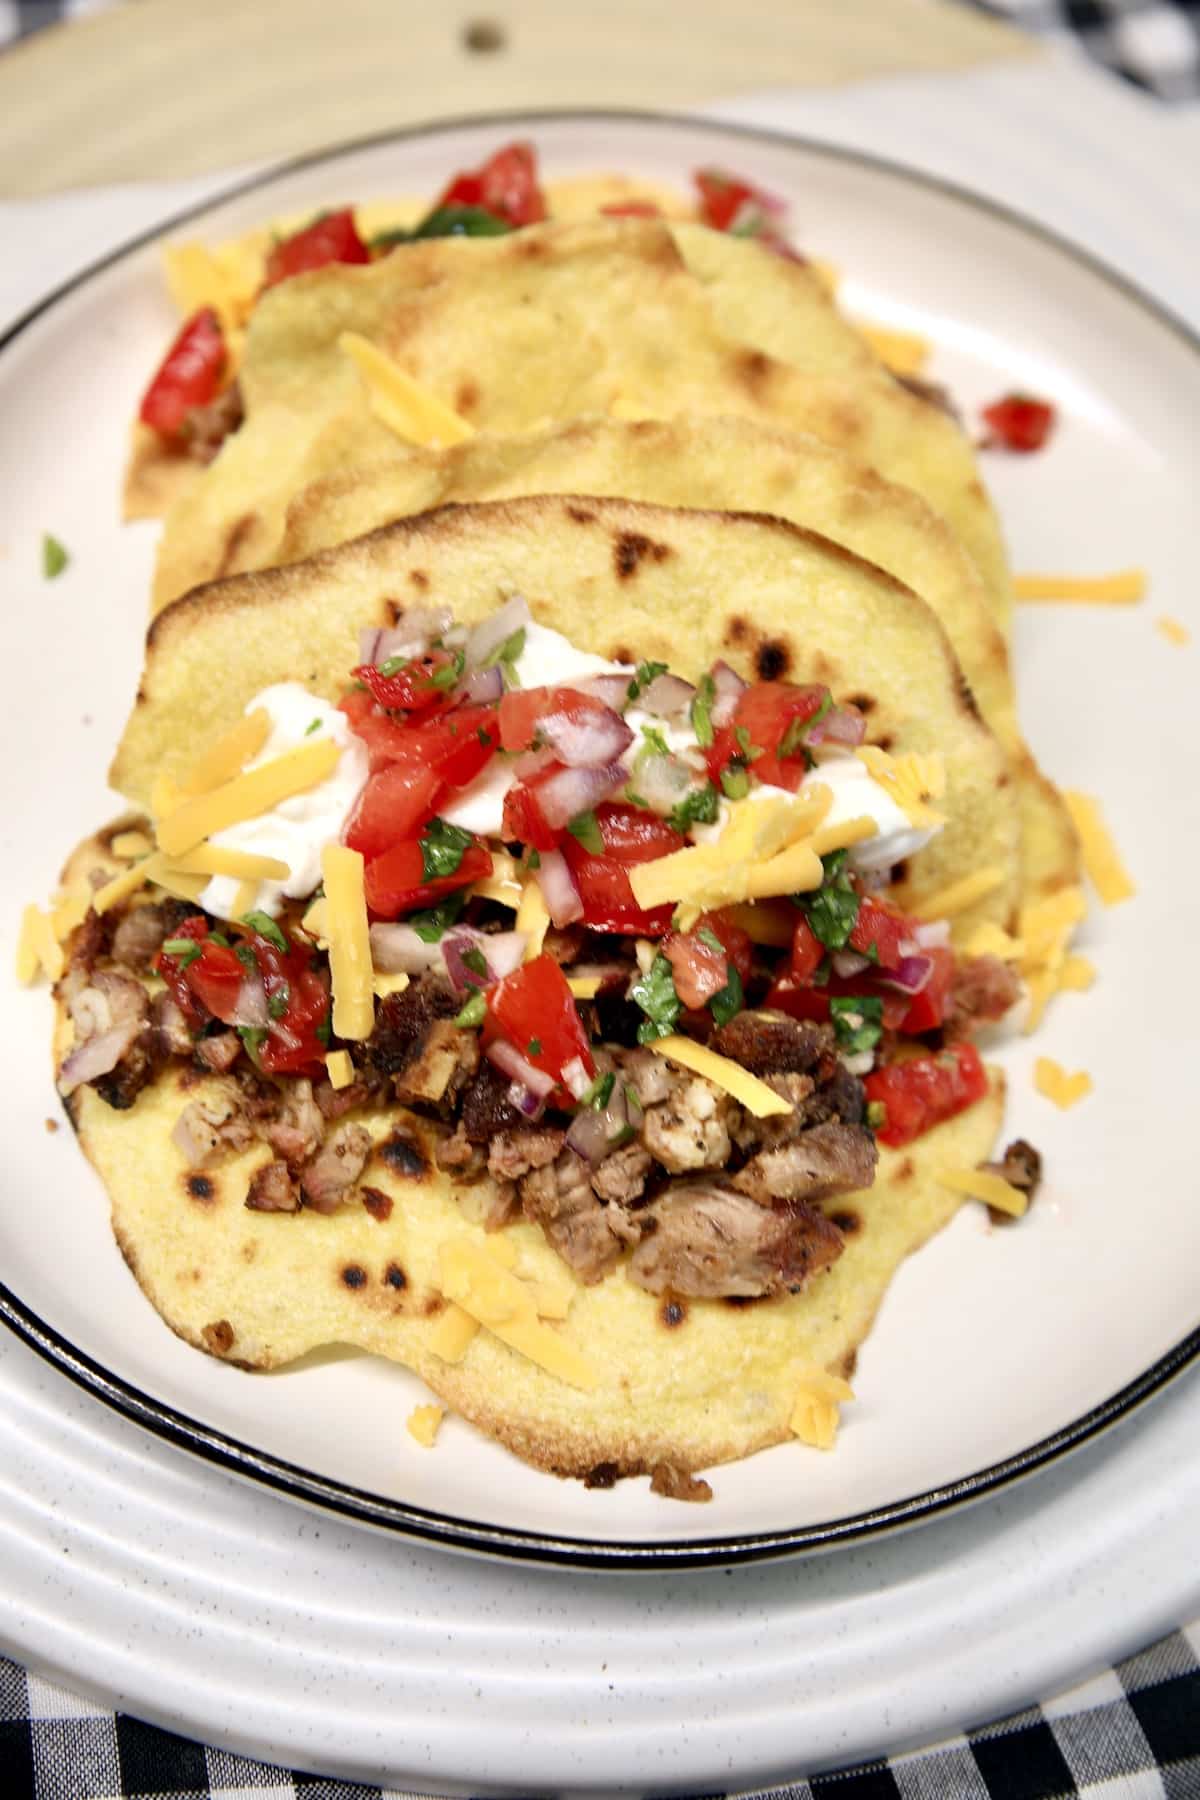 Beef tacos on a plate with salsa, cheese and sour cream.